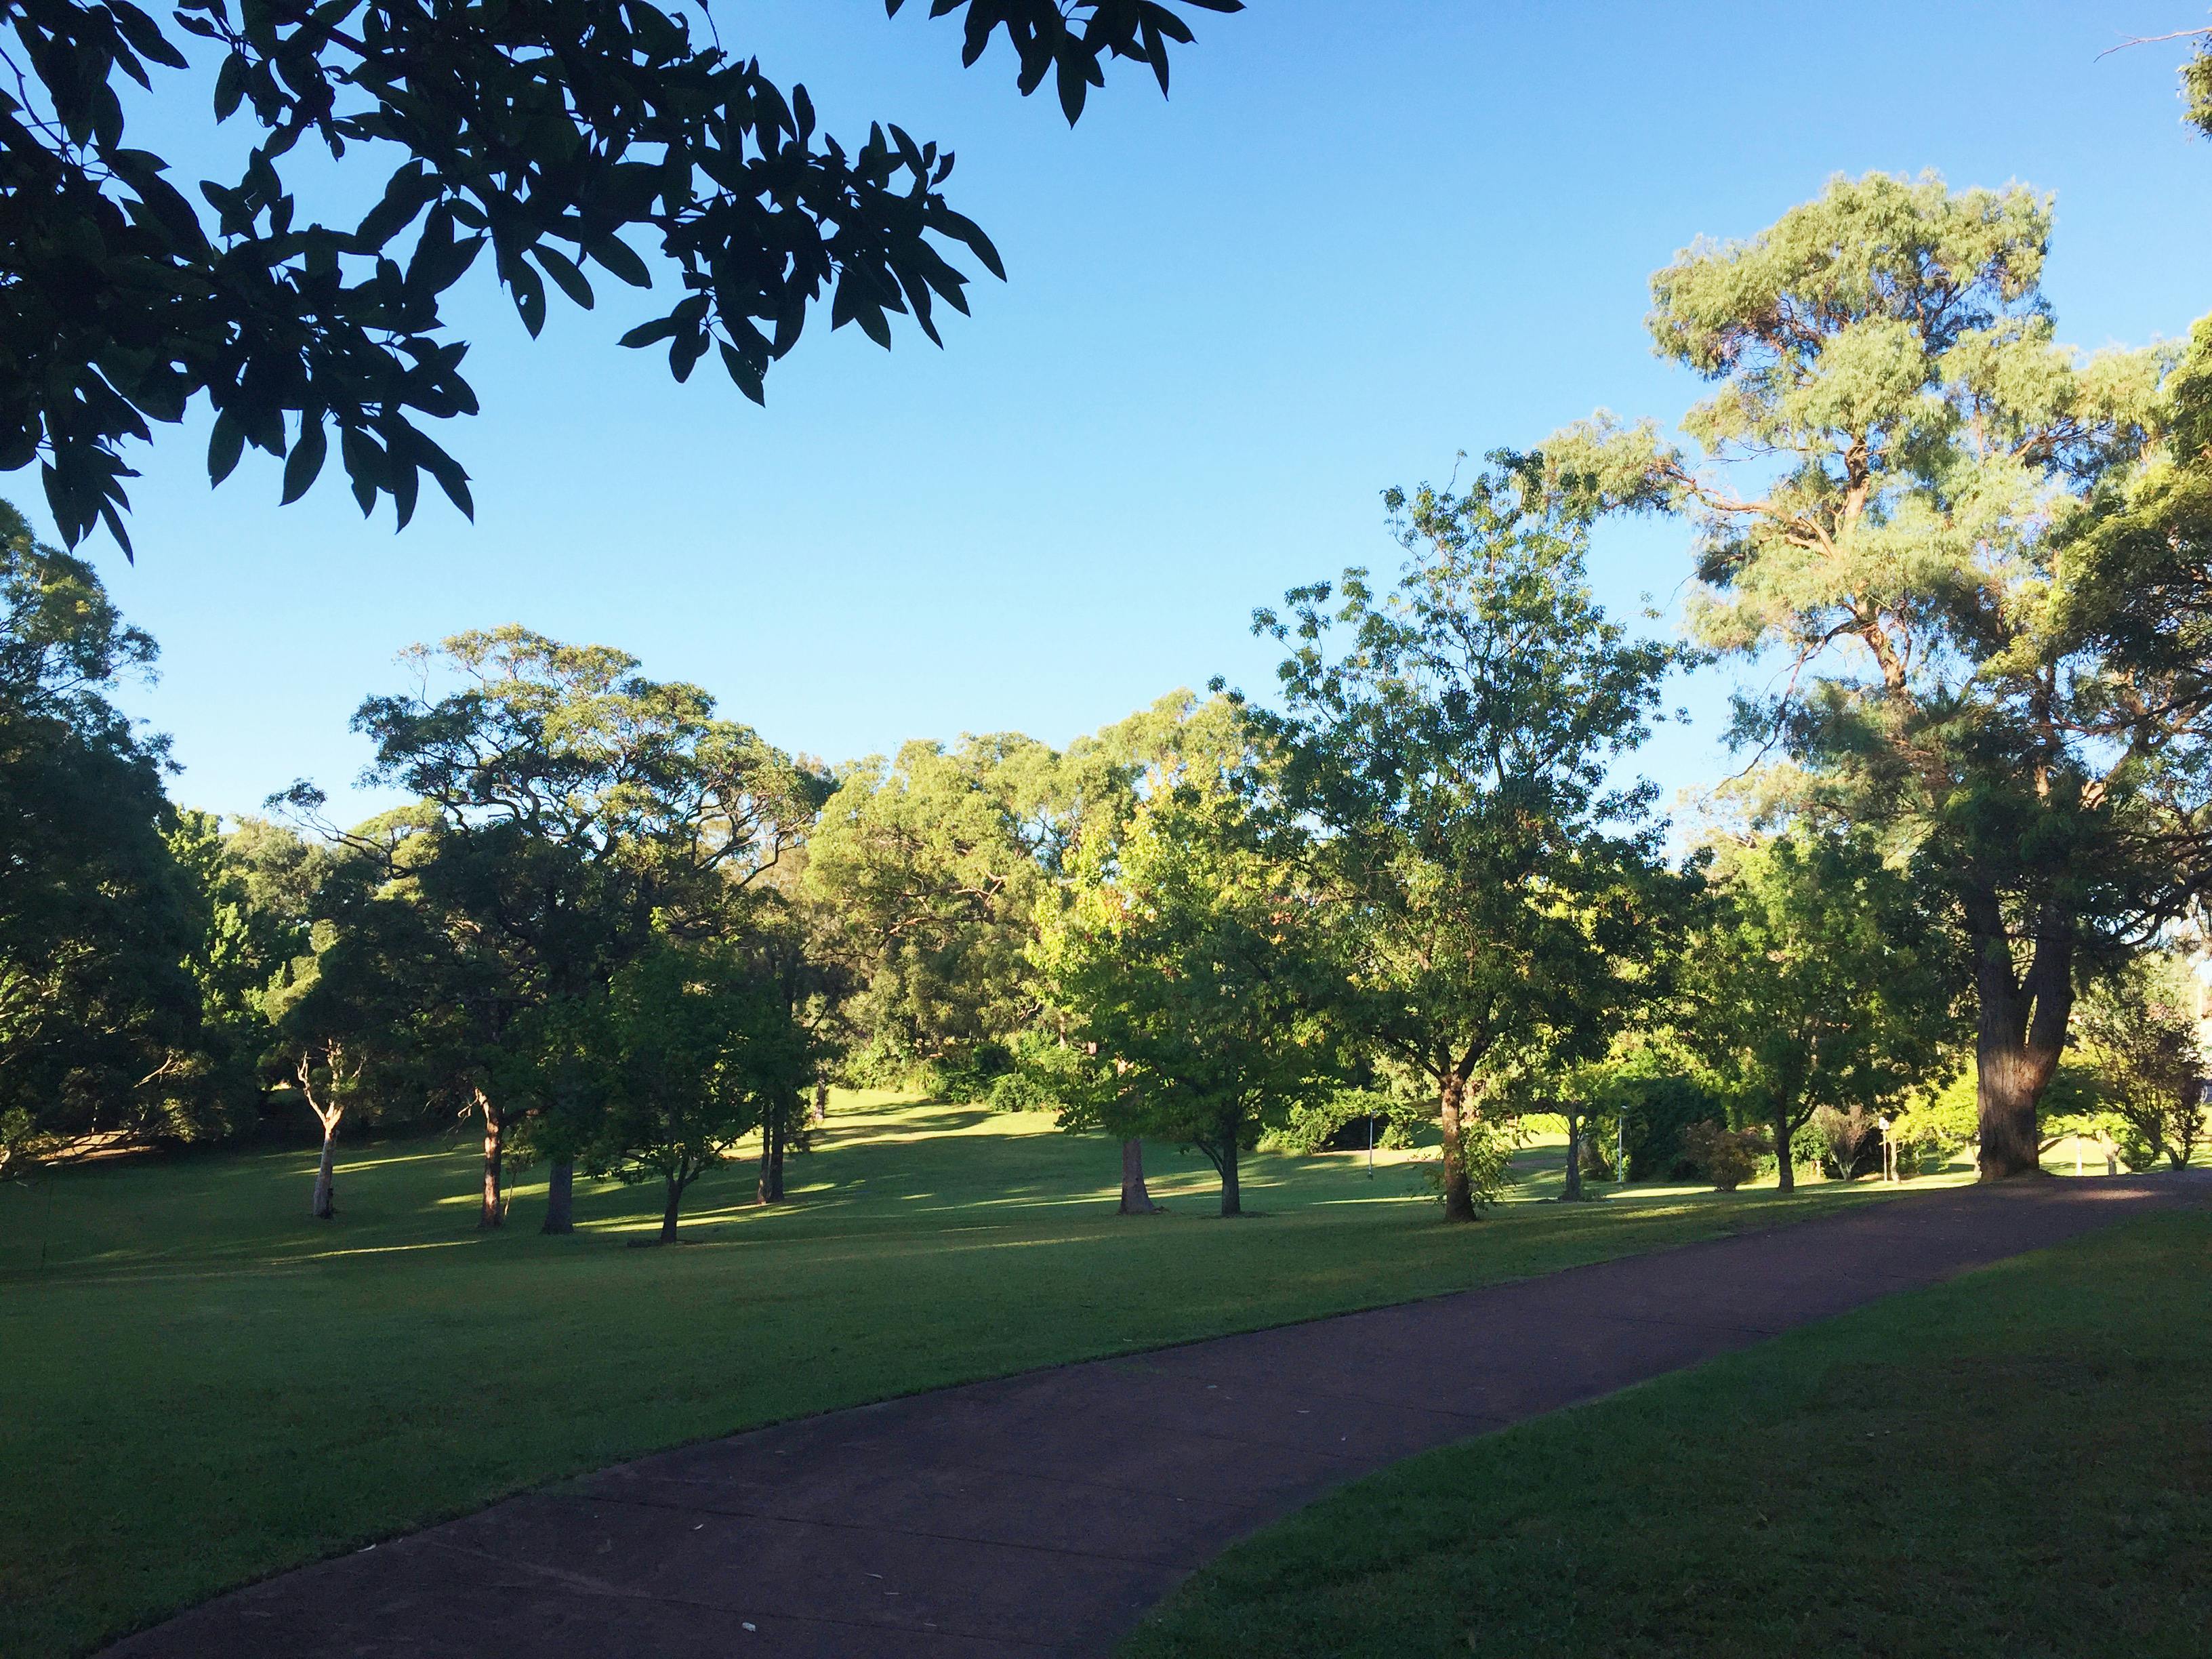 Early morning at Buttenshaw Park, Springwood